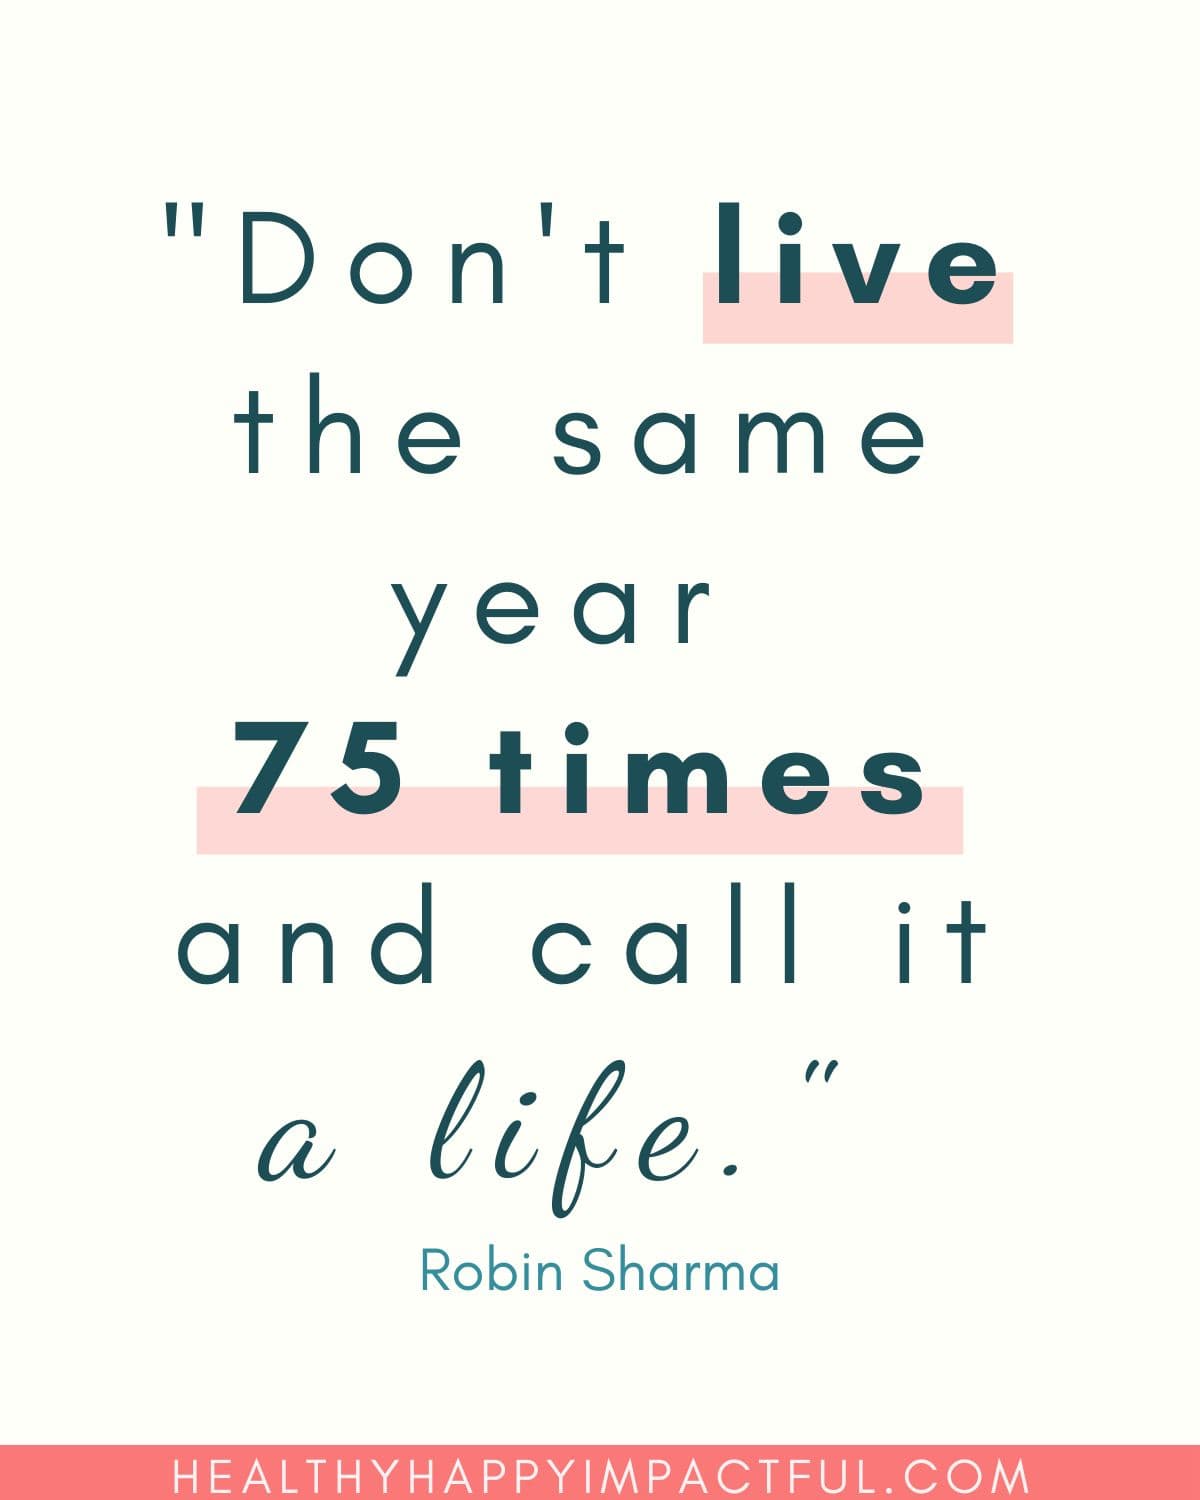 Don't live the same year 75 times and call it a life. Robin Sharma quotes about vision boards